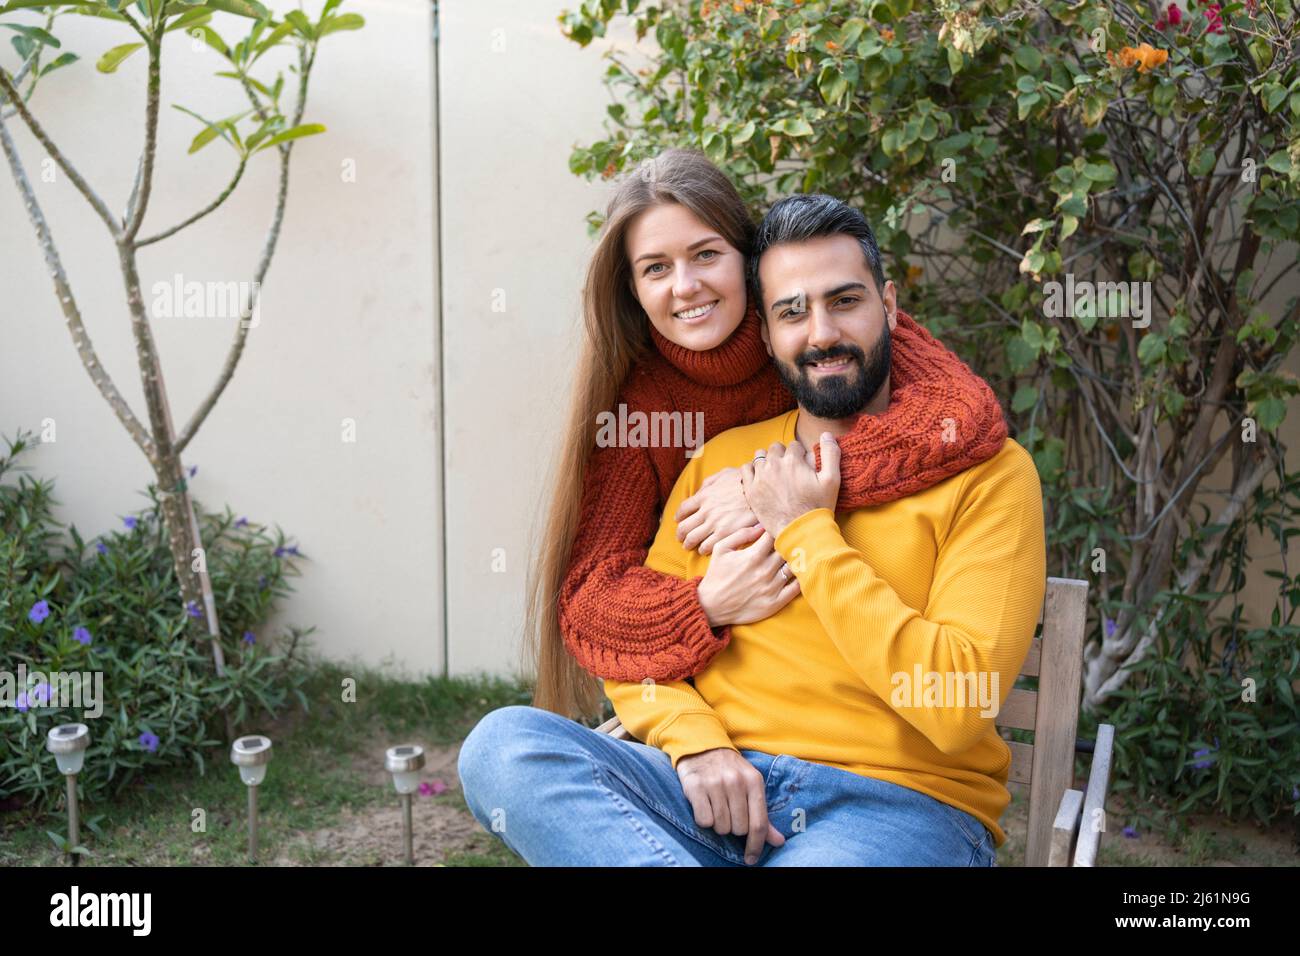 Happy woman hugging man from behind in garden Stock Photo